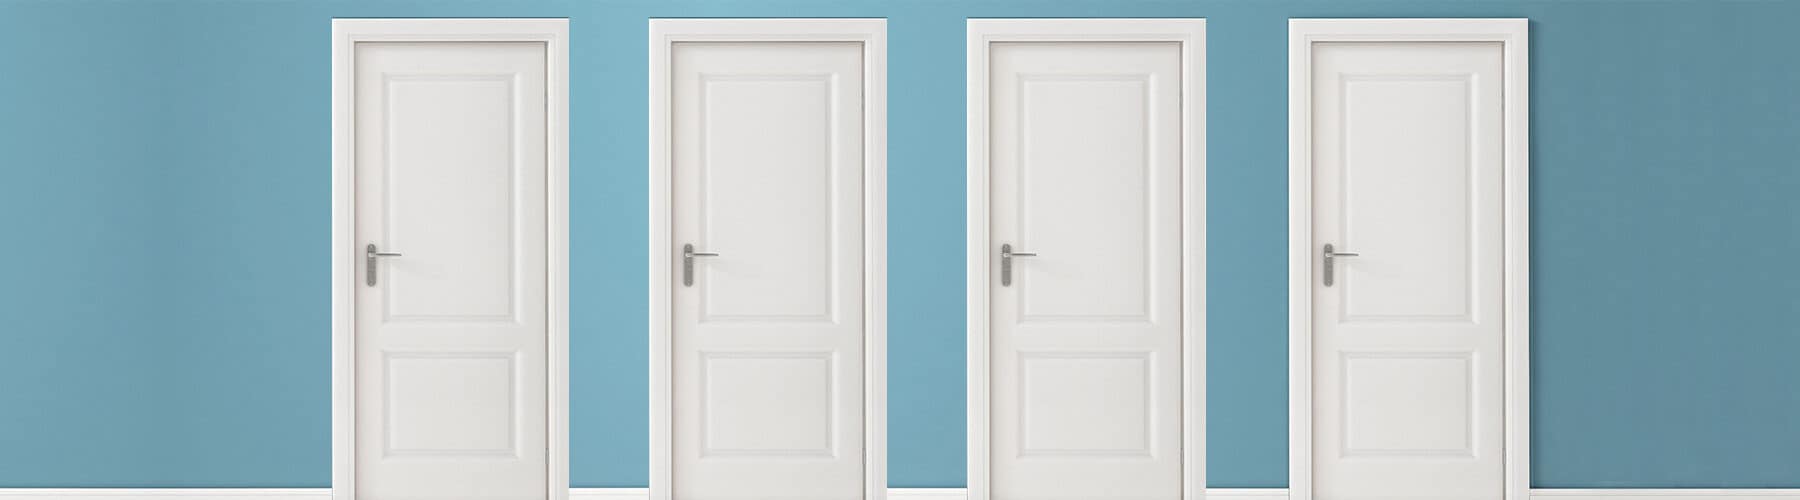 4 white interior doors on a blue wall